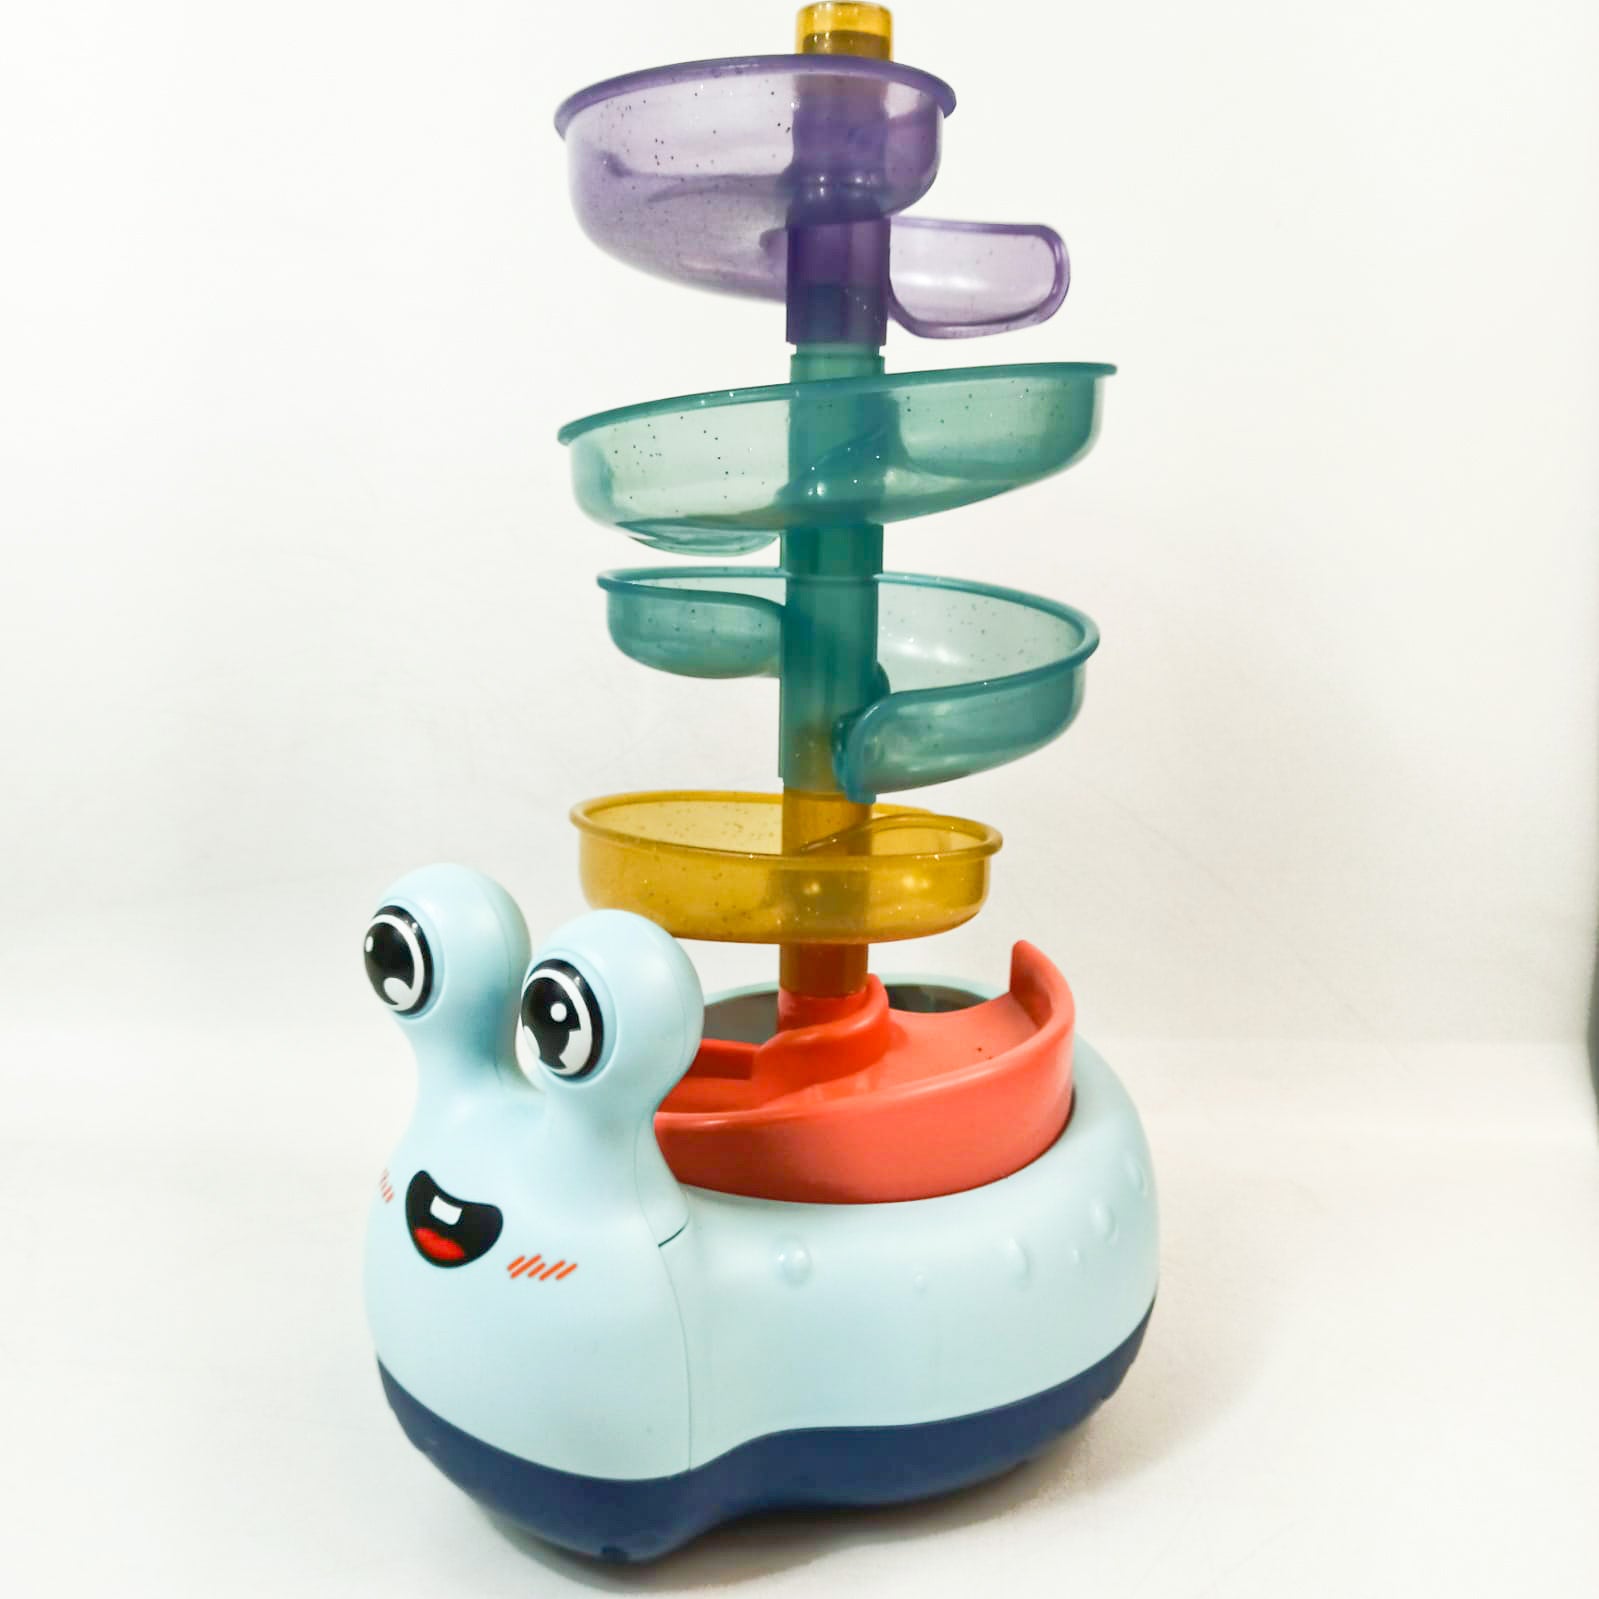 Fun and Rotating Musical Orbital Snail For Kids and Toddlers